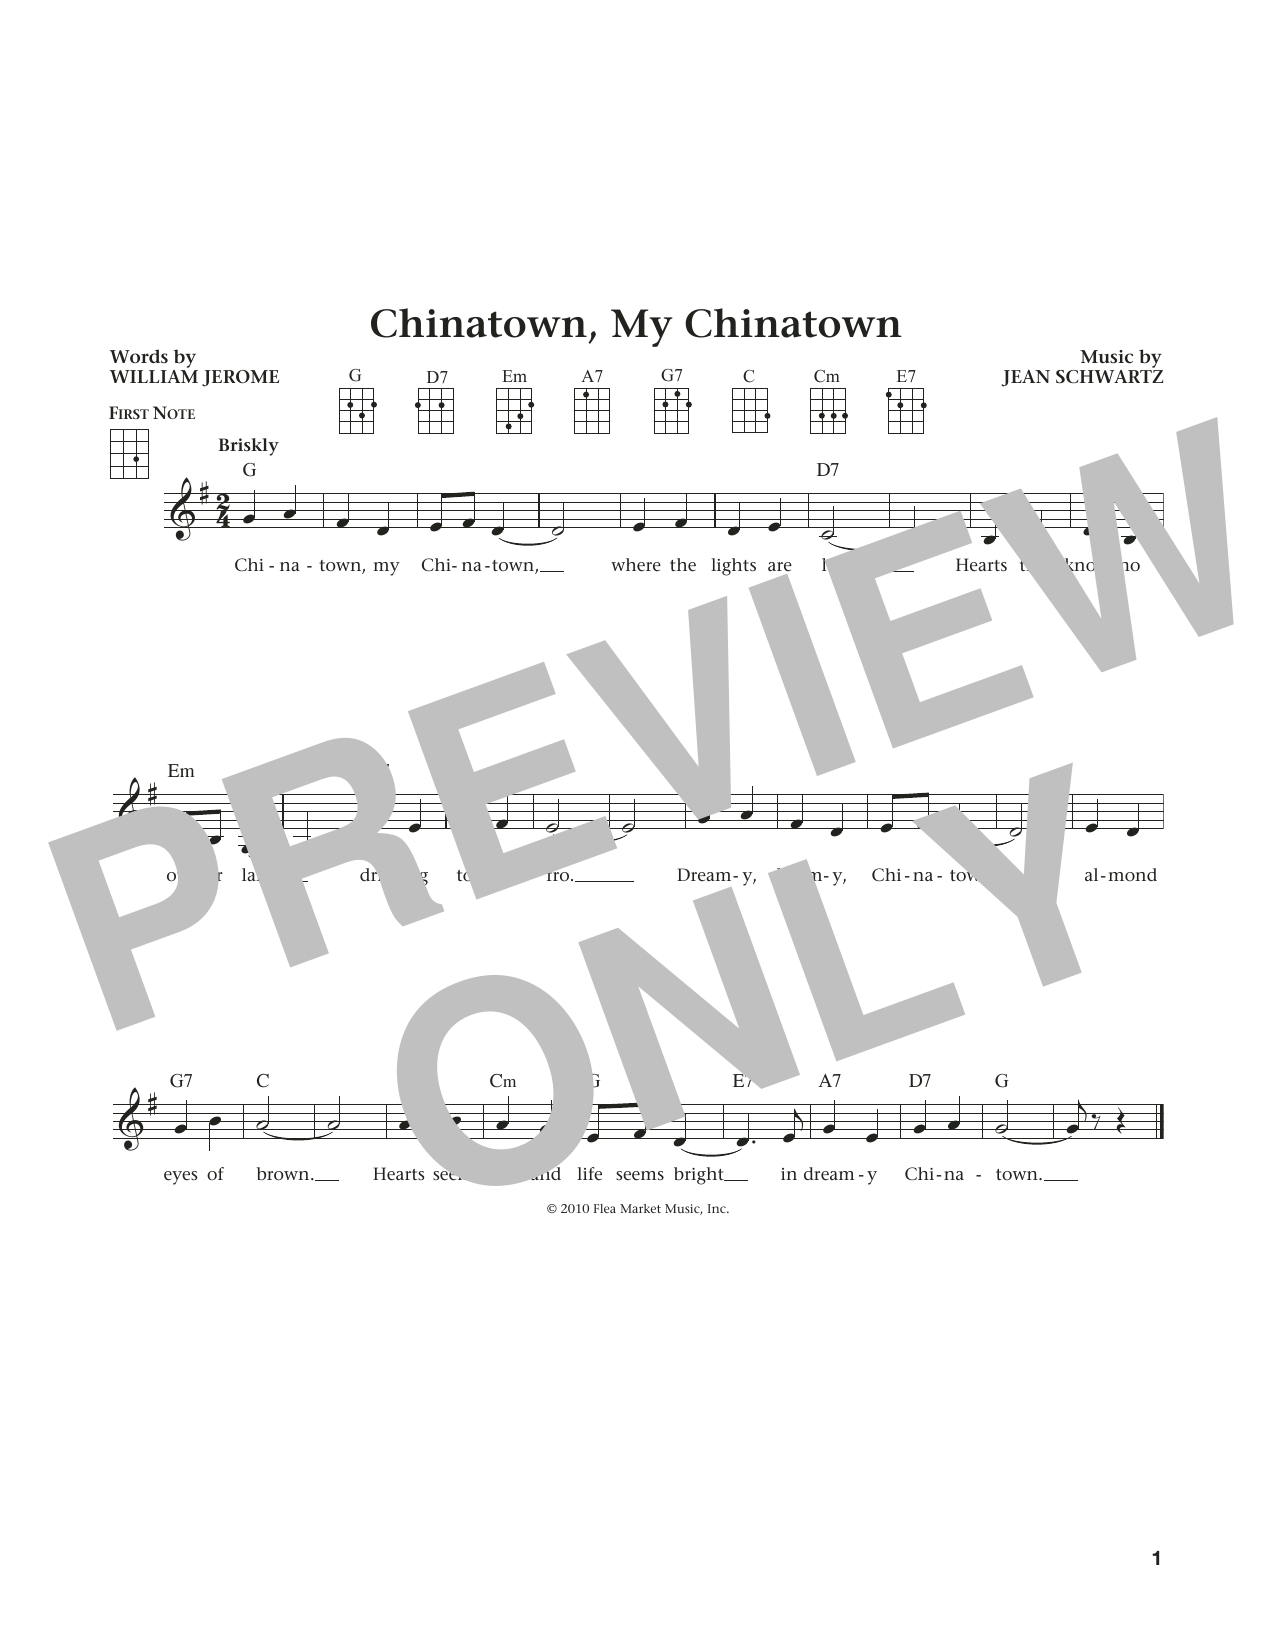 Download William Jerome Chinatown, My Chinatown (from The Daily Sheet Music